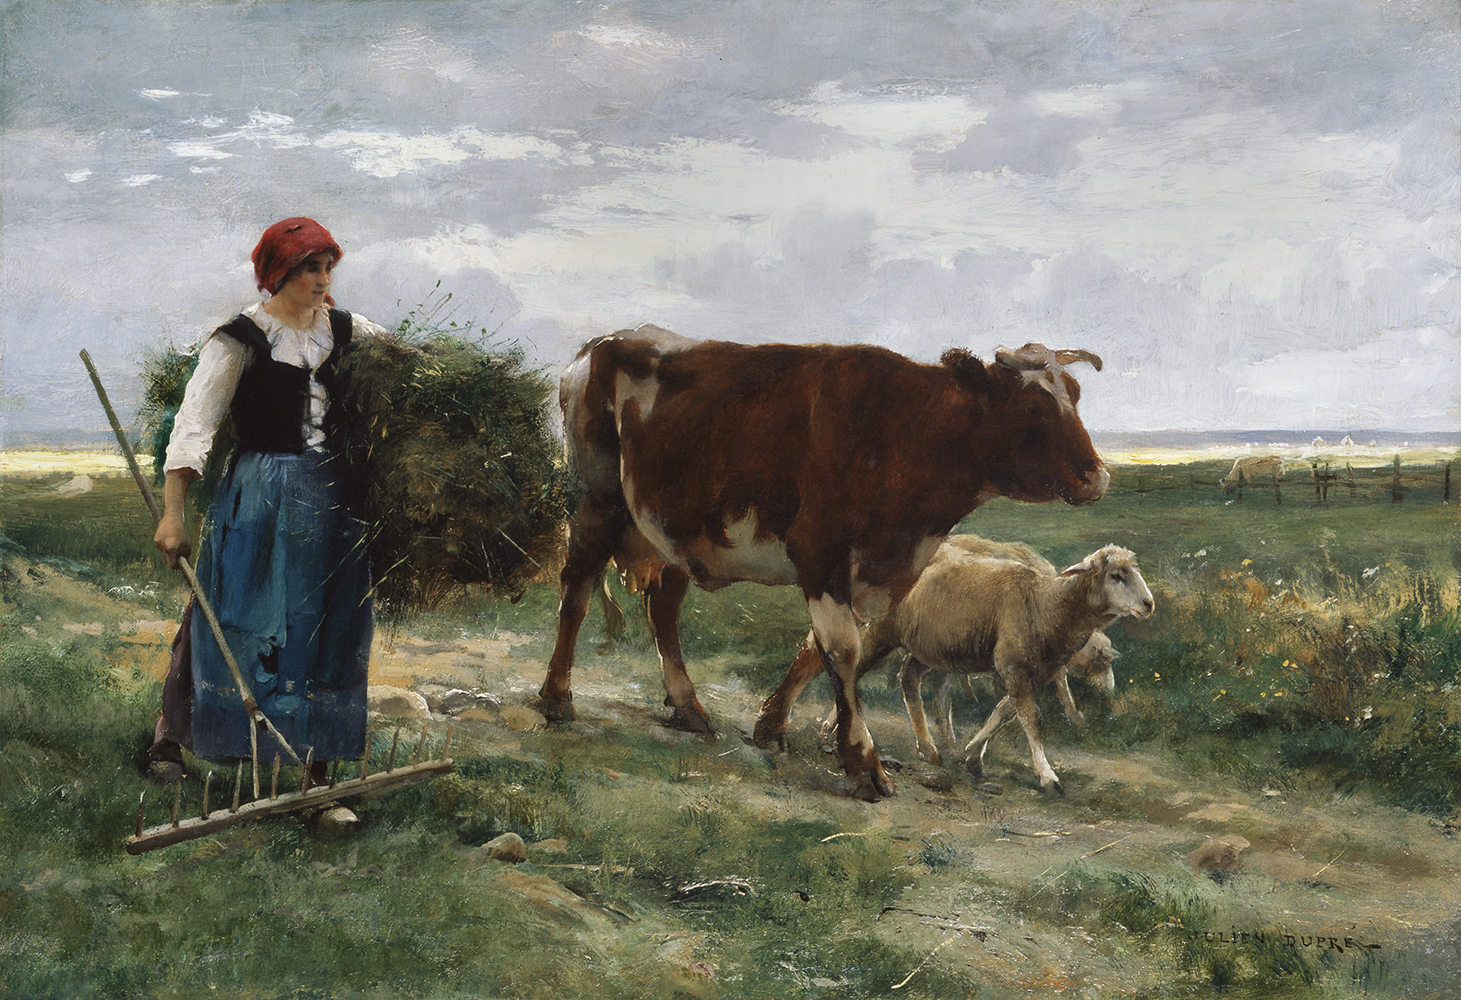 Shepherdess with a Cow and Sheep on a Path - Julien Dupre